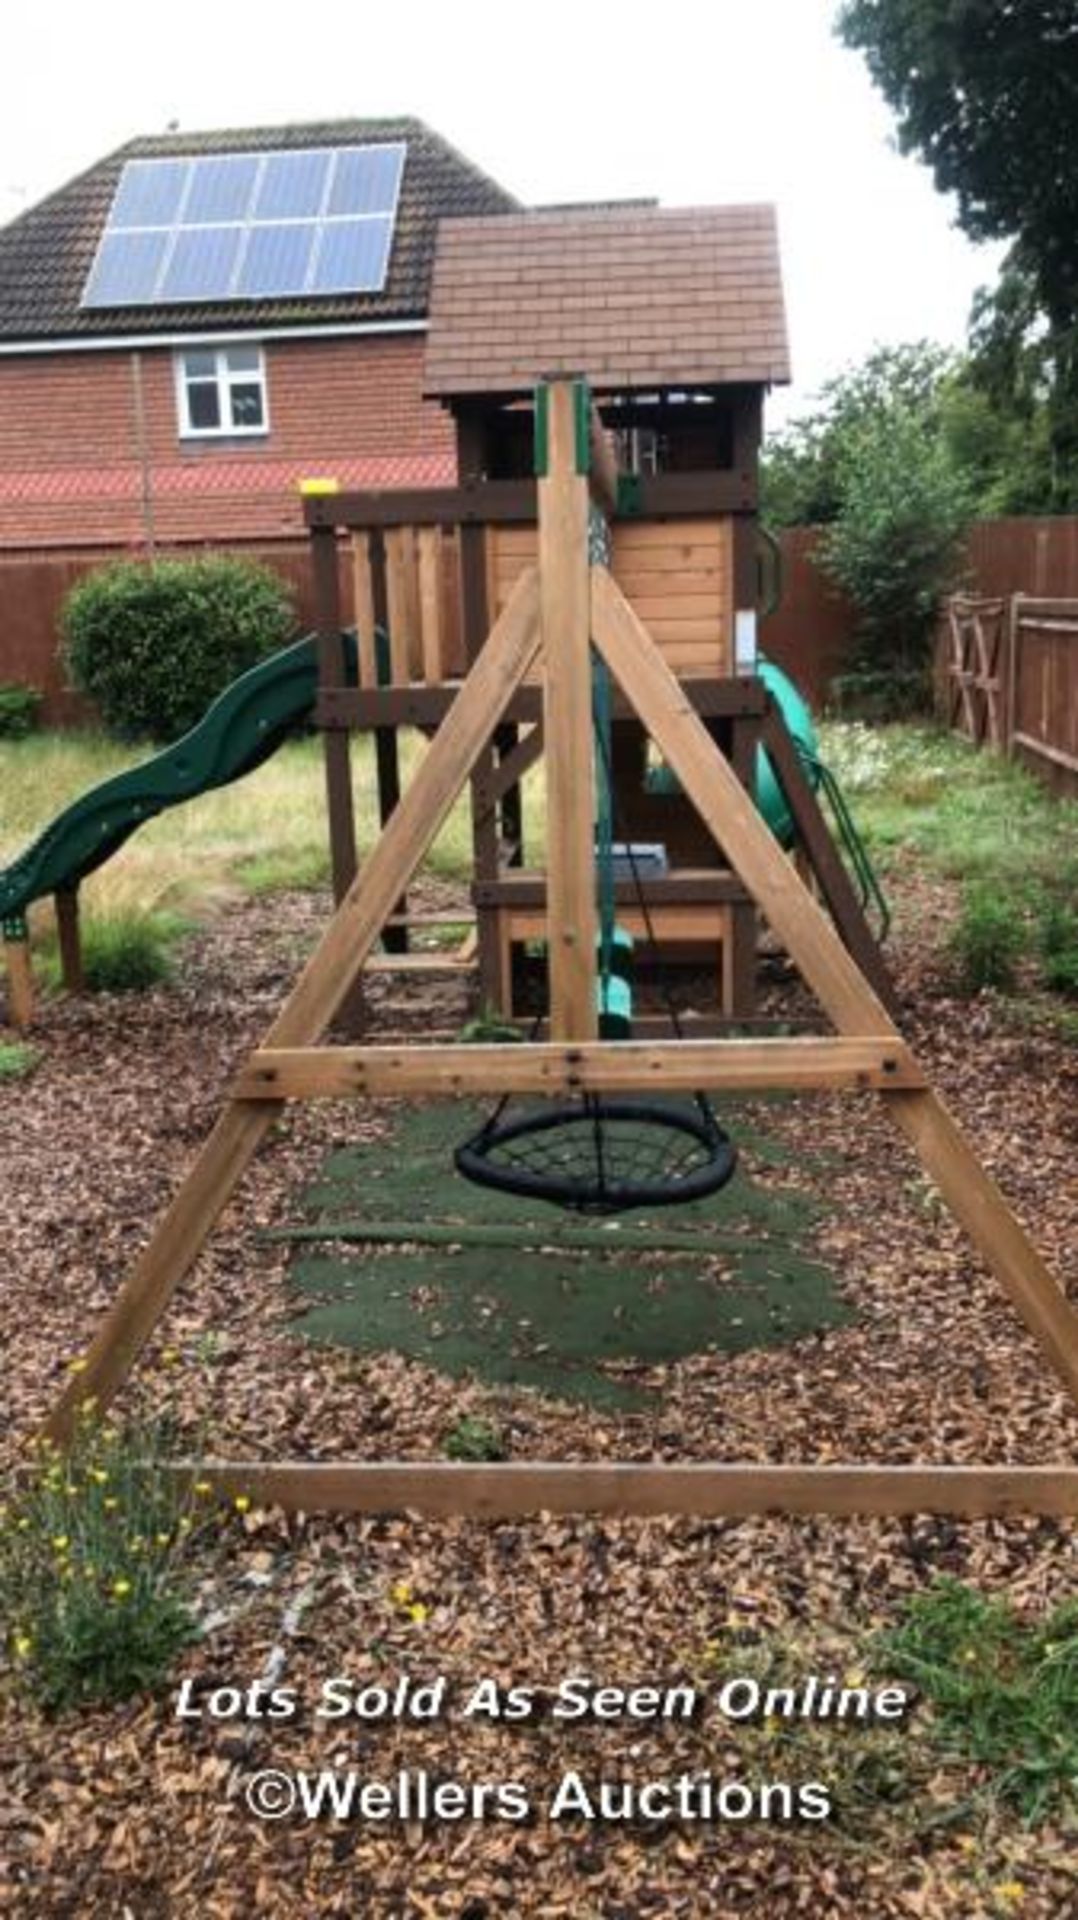 BACKYARD DISCOVERY CHILDREN'S ADVENTURE PLAY AREA, WITH 3X SWINGS, 2X SLIDES, BBQ AREA AND ROCK - Bild 8 aus 8